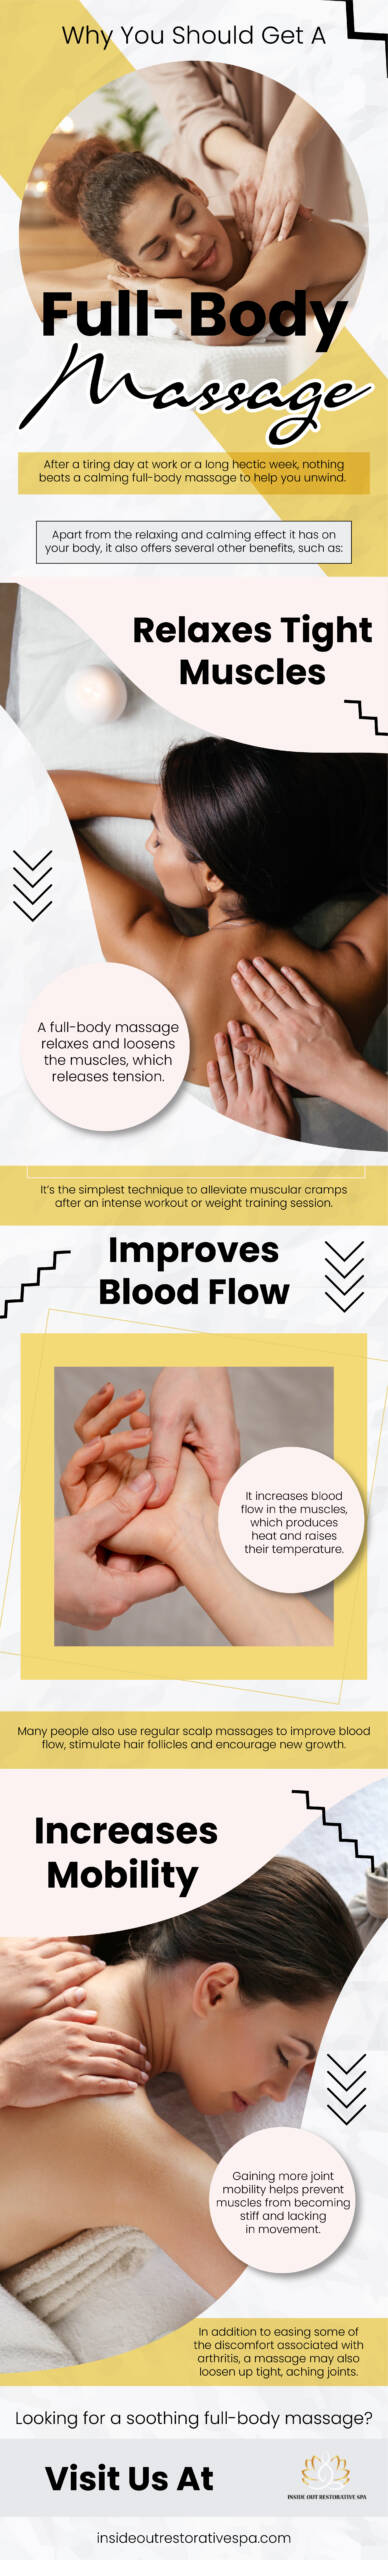 Why You Should Get A Full Body Massage - Infograph